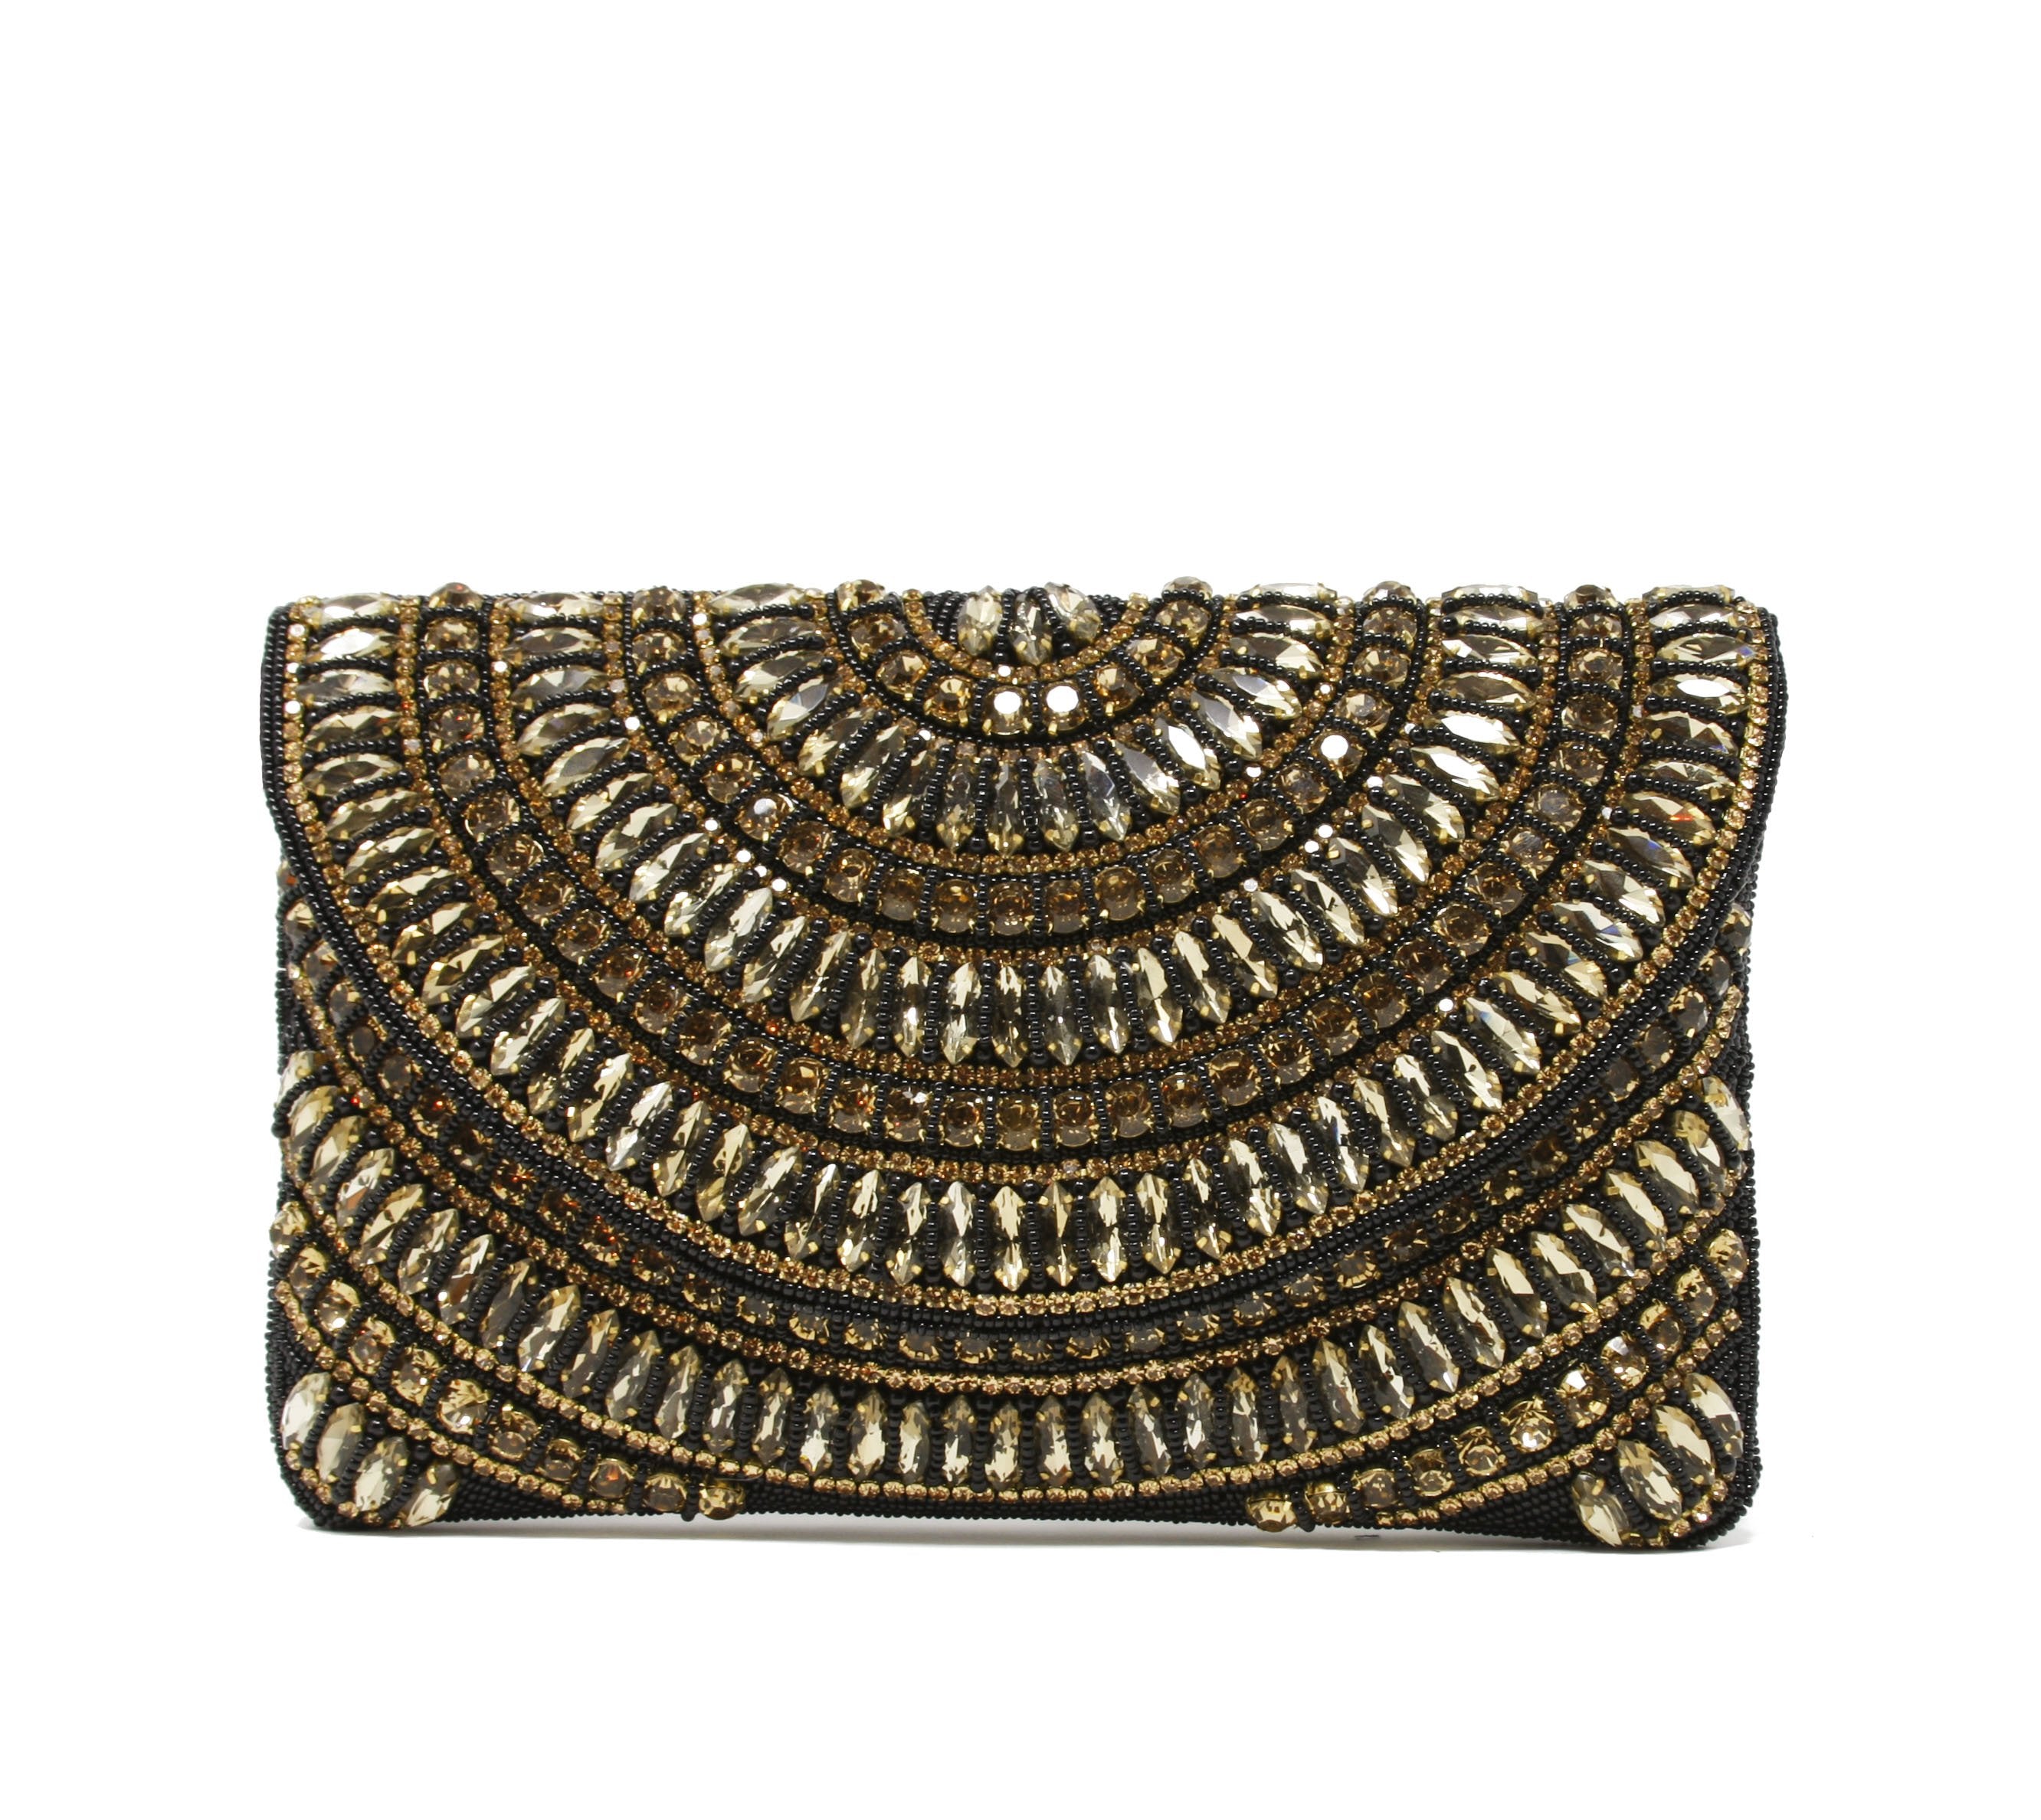 Sparkly gold and black clutch evening bag with black twisted beaded wristlet included inside pocket.